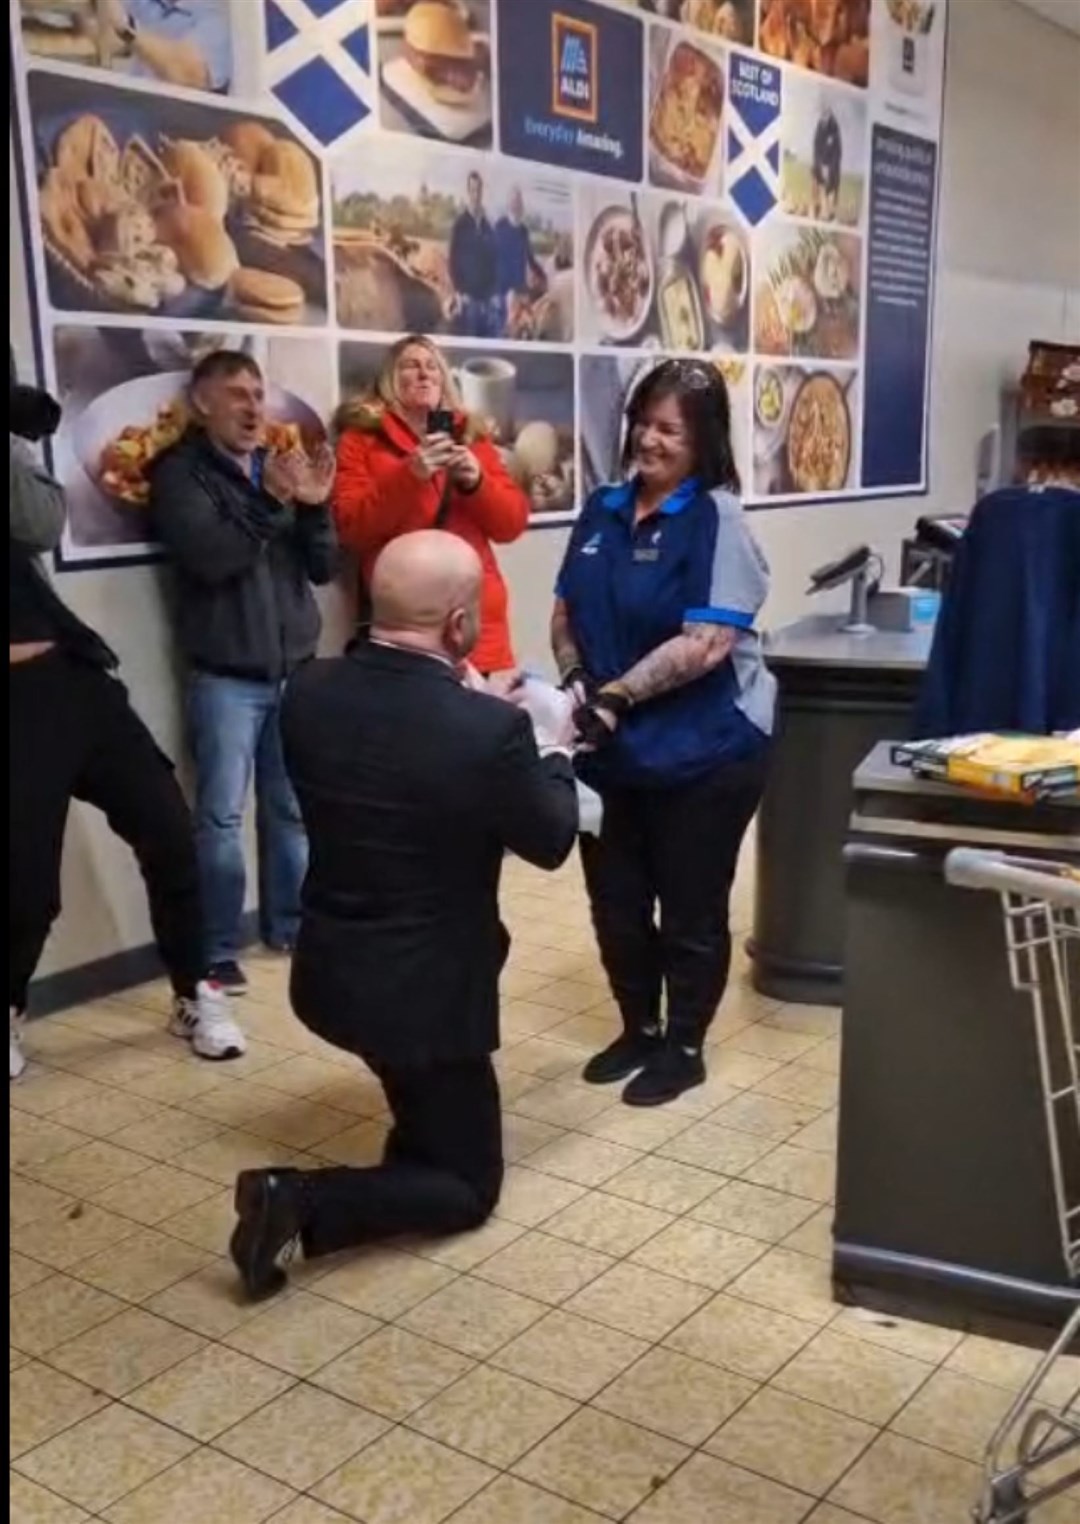 Mike proposing to Lynne at Aldi.